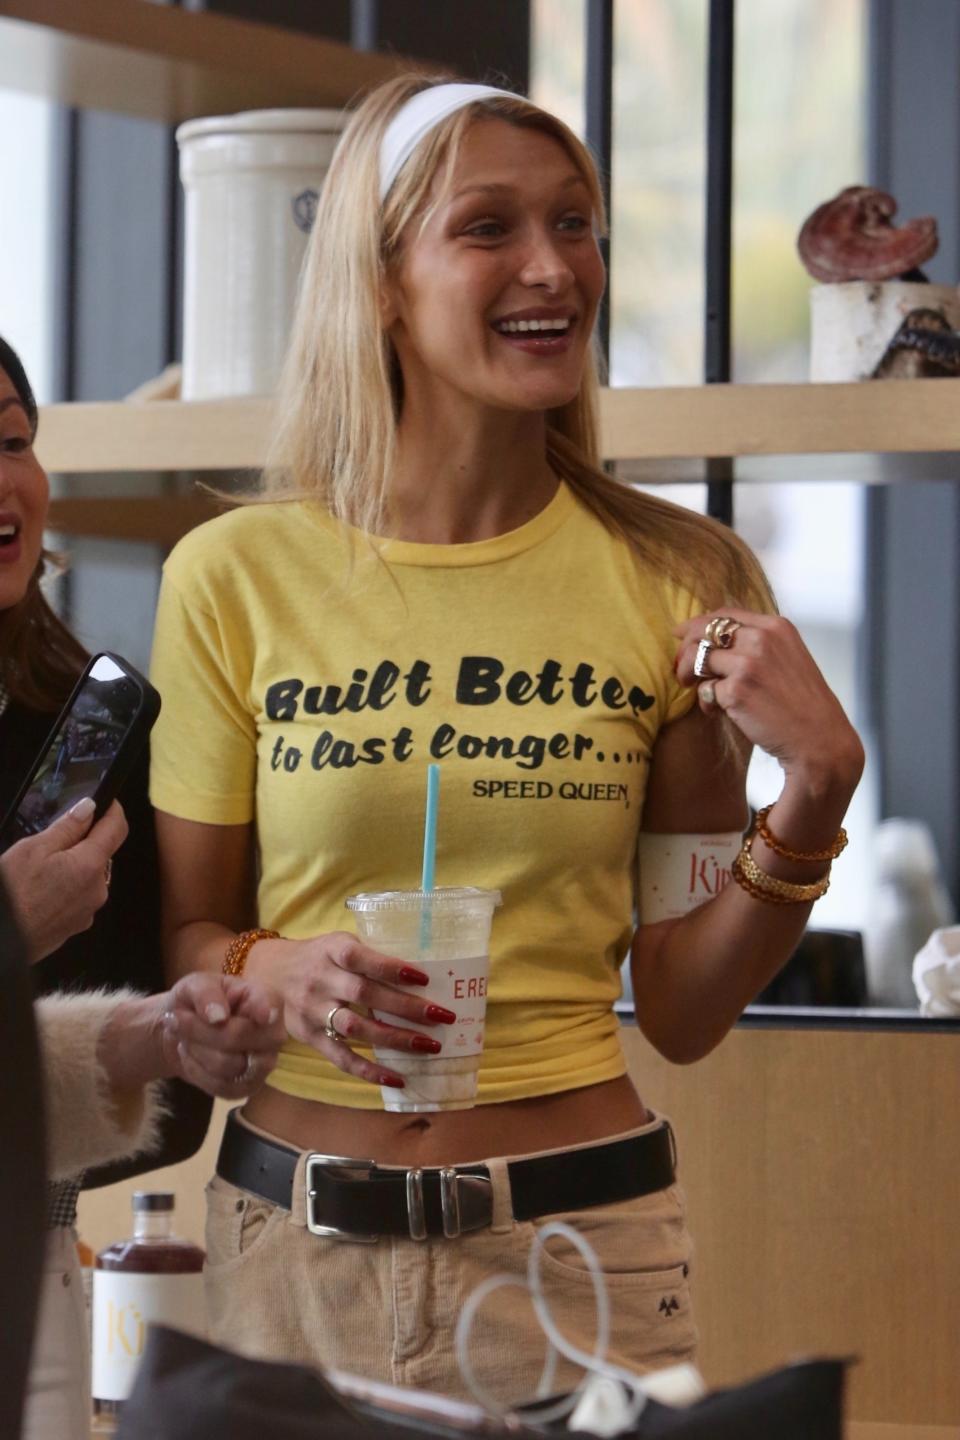 Bella Hadid in January 2023, hosting a press event for her “Kinsicle” smoothie at the Santa Monica Erewhon.